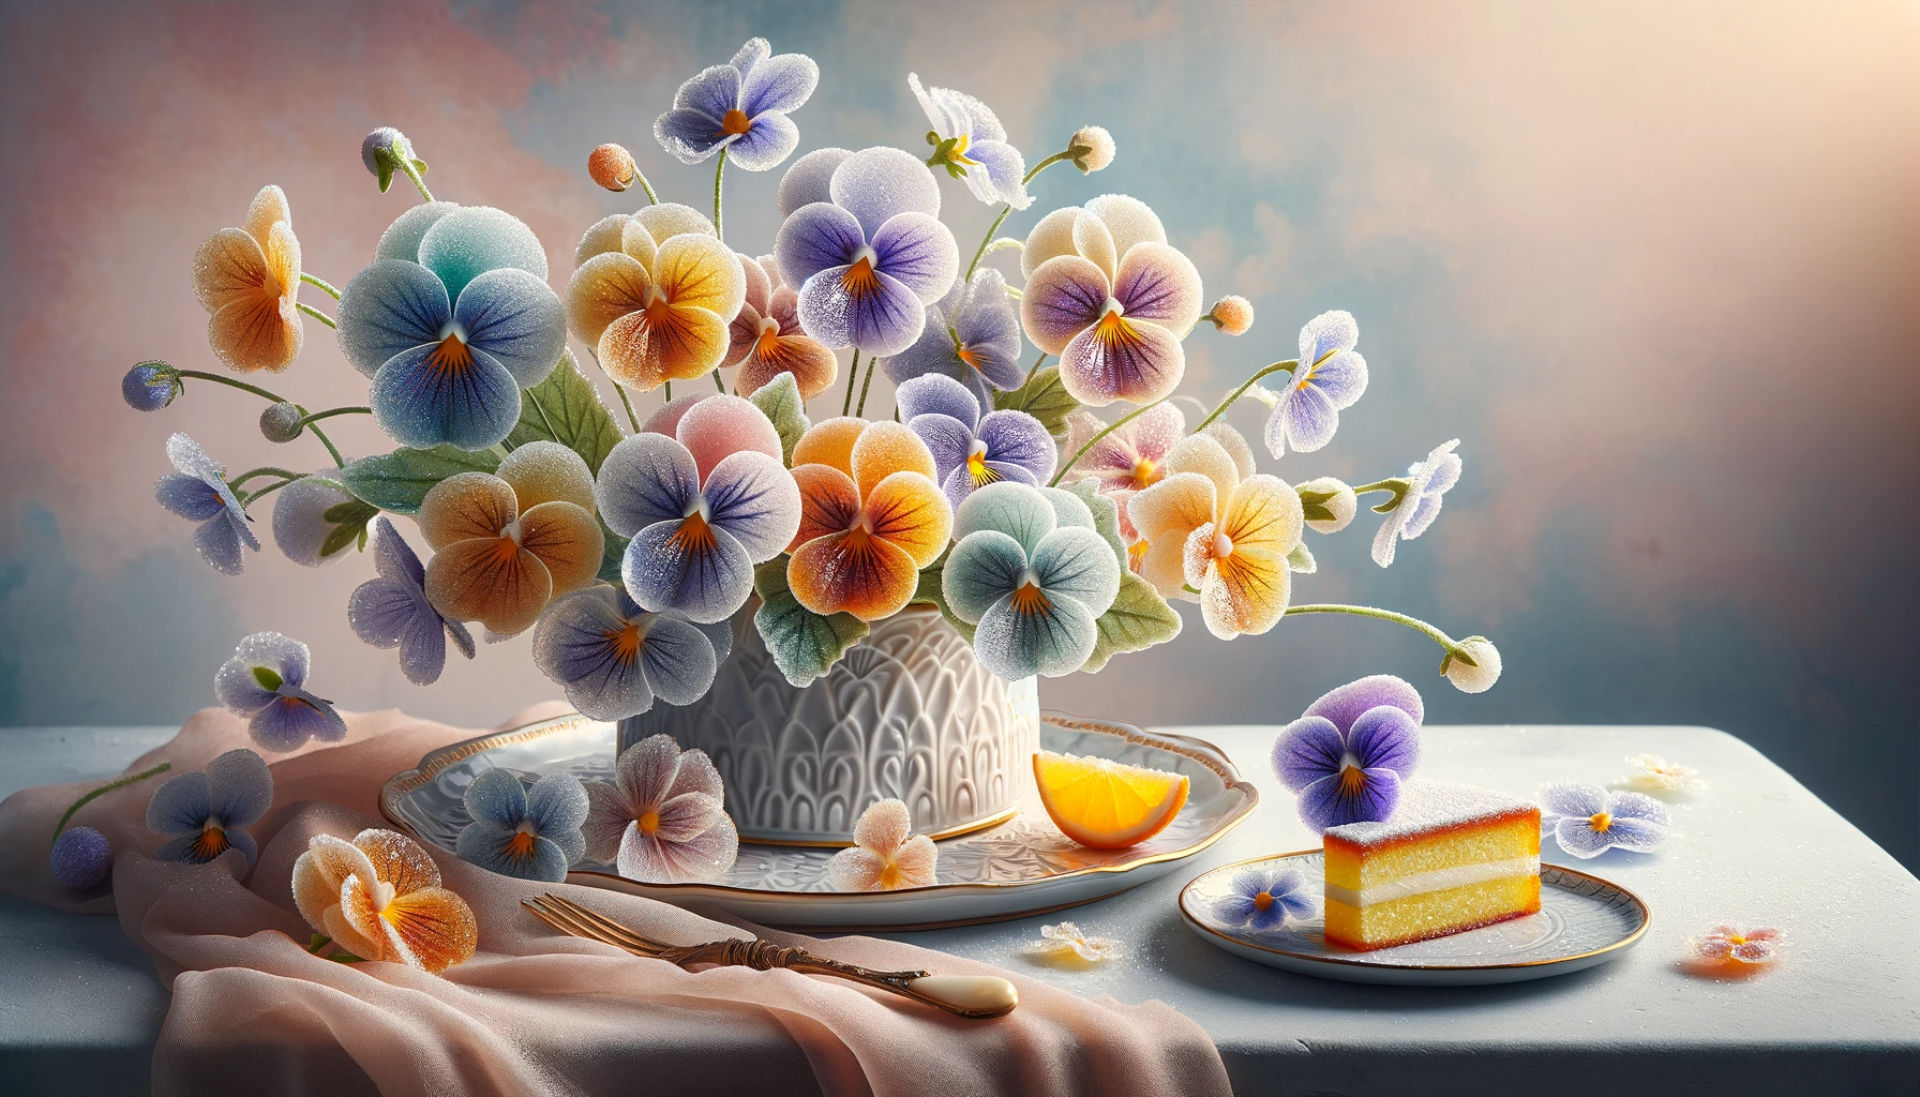 A high-definition image of candied violas arranged elegantly on a delicate porcelain plate, set against a soft, pastel-coloured background to enhance their visual appeal. The candied violas are shimmering with superfine sugar, displaying a range of vibrant colours. Some are fully opened, while others are delicately closed. The image captures the intricate details of the sugar-coated petals, with a few violas artistically placed beside a slice of lemon cake, showcasing their use as a dessert garnish. The overall ambiance is sophisticated and refined, highlighting the elegance of these edible decorations.